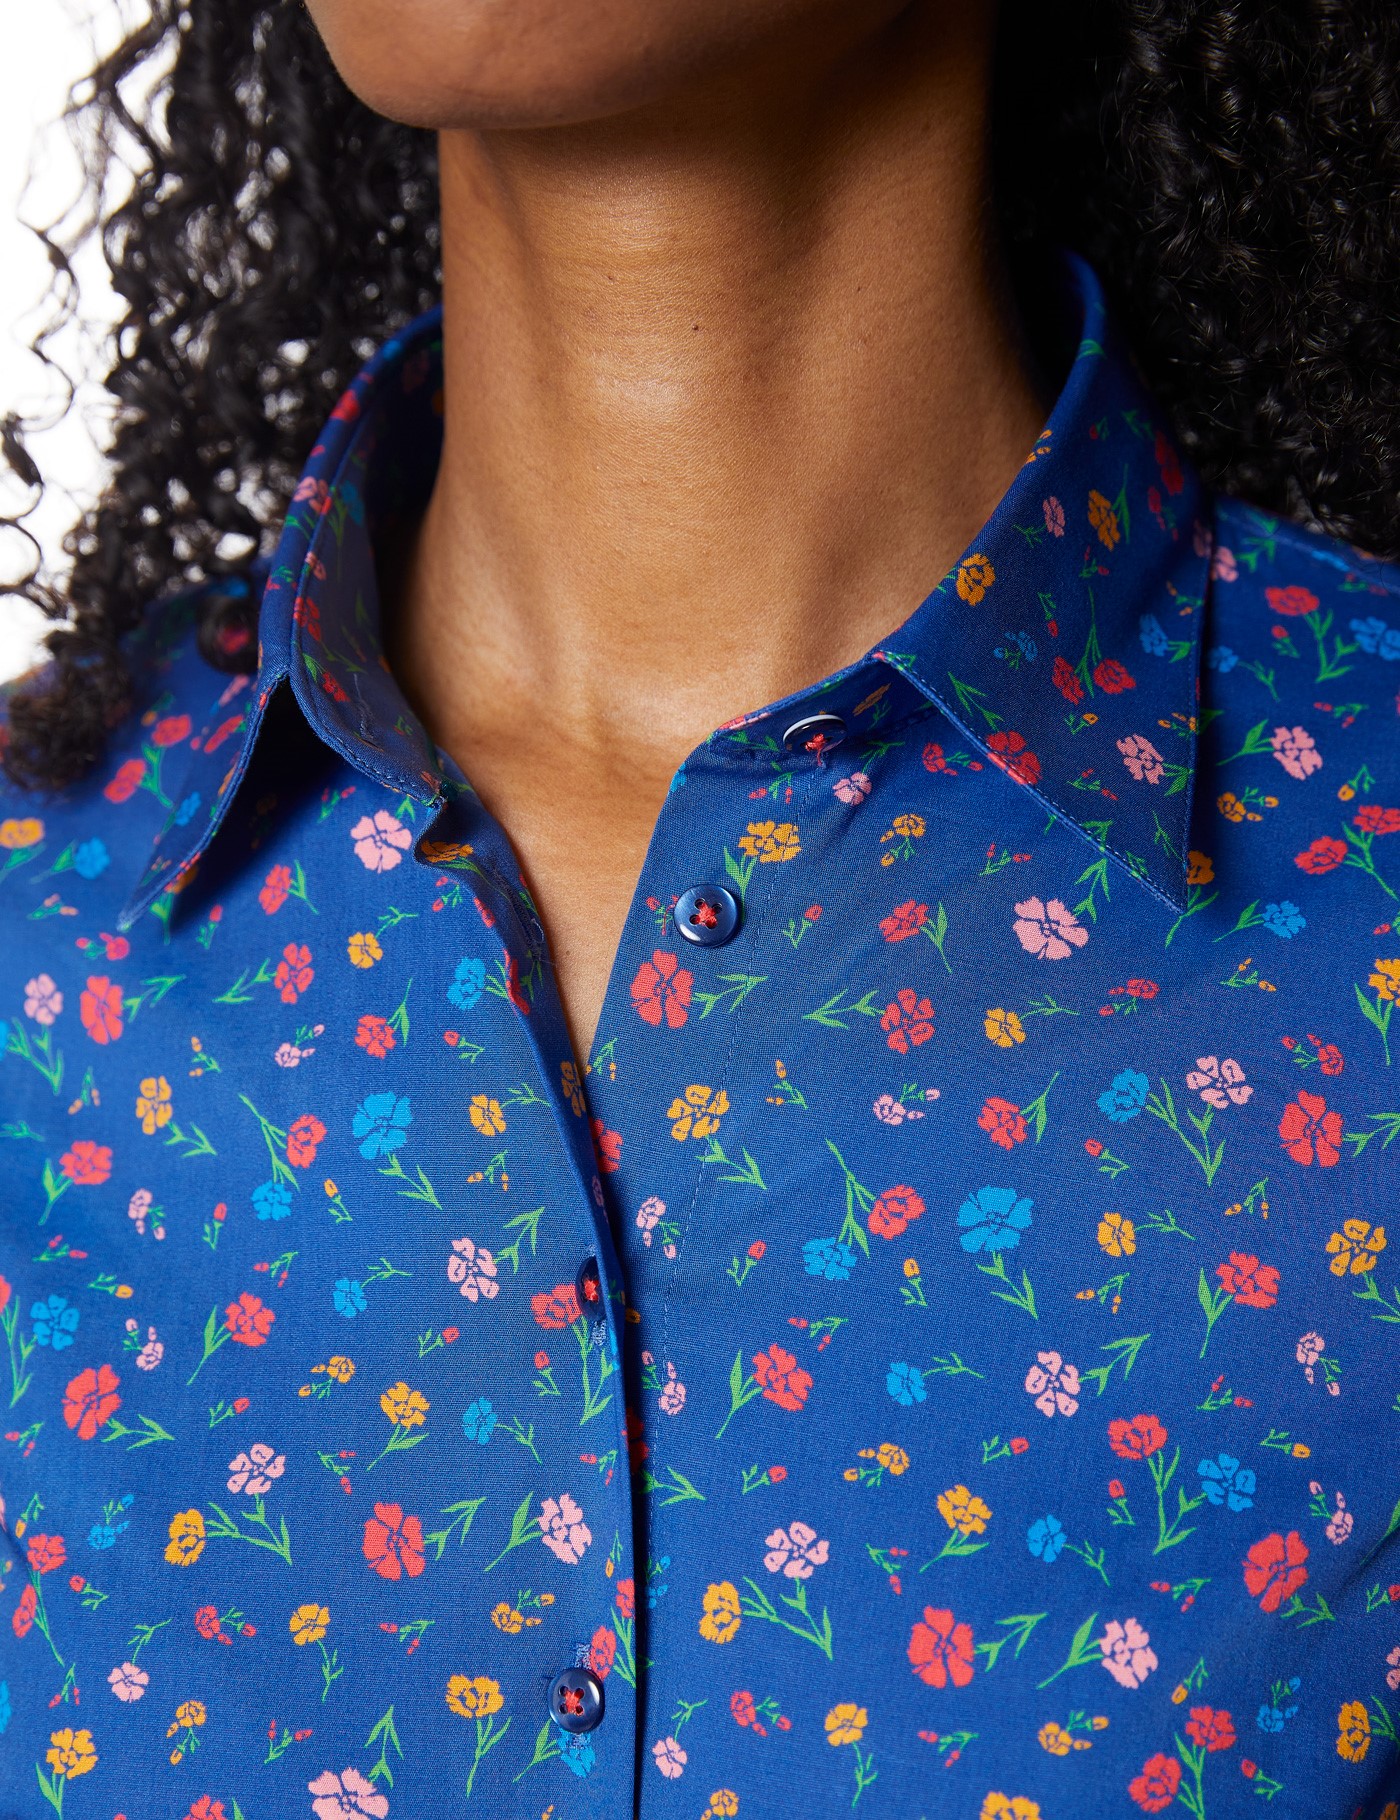 Cotton Stretch Women's Fitted Shirt With Floral Design in Blue & Yellow ...